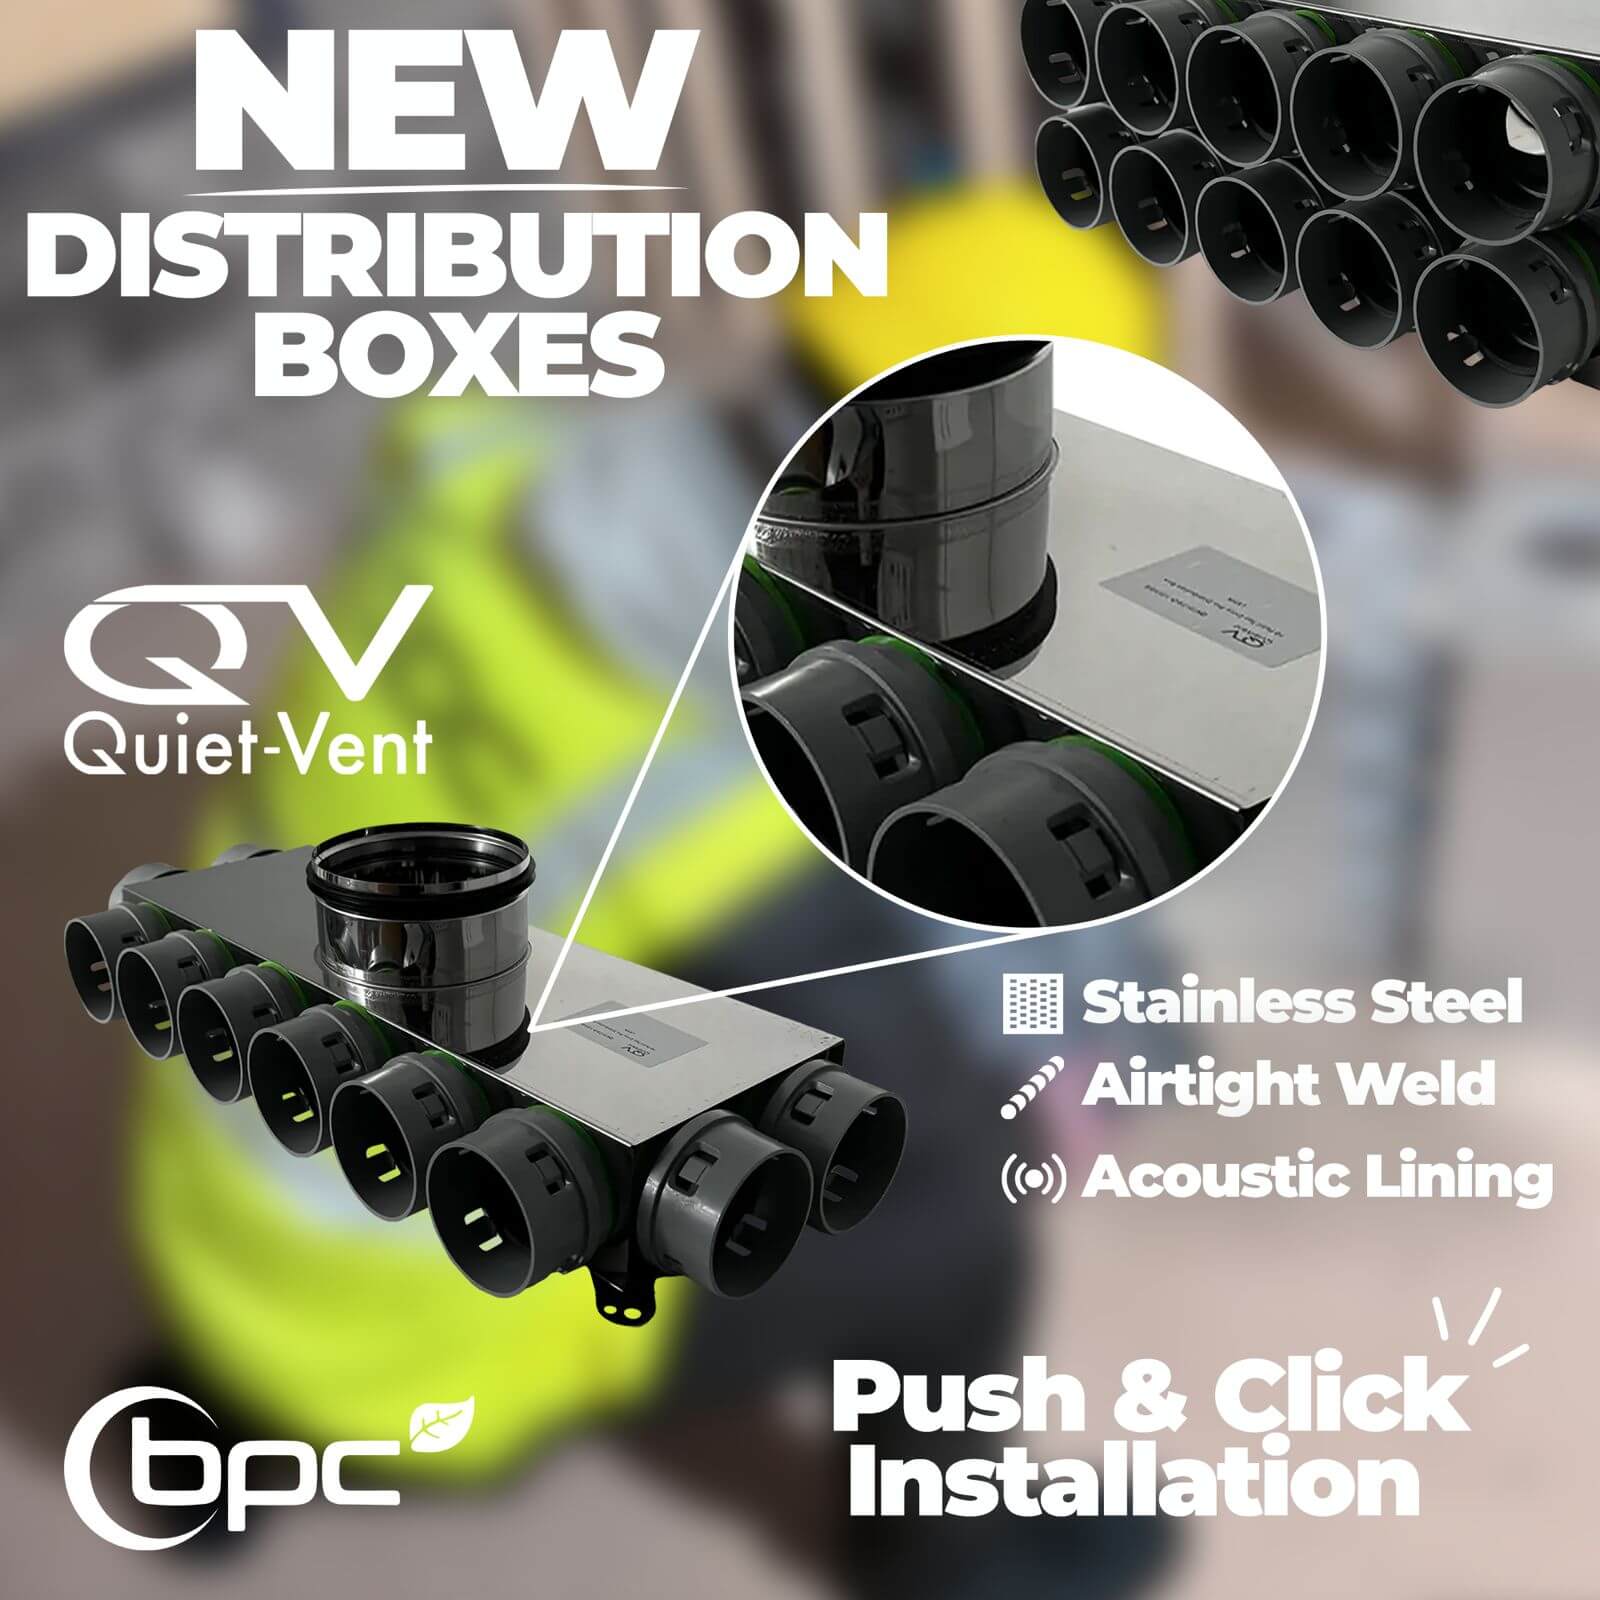 The Whole New QV Pro Range for Superior Air Quality